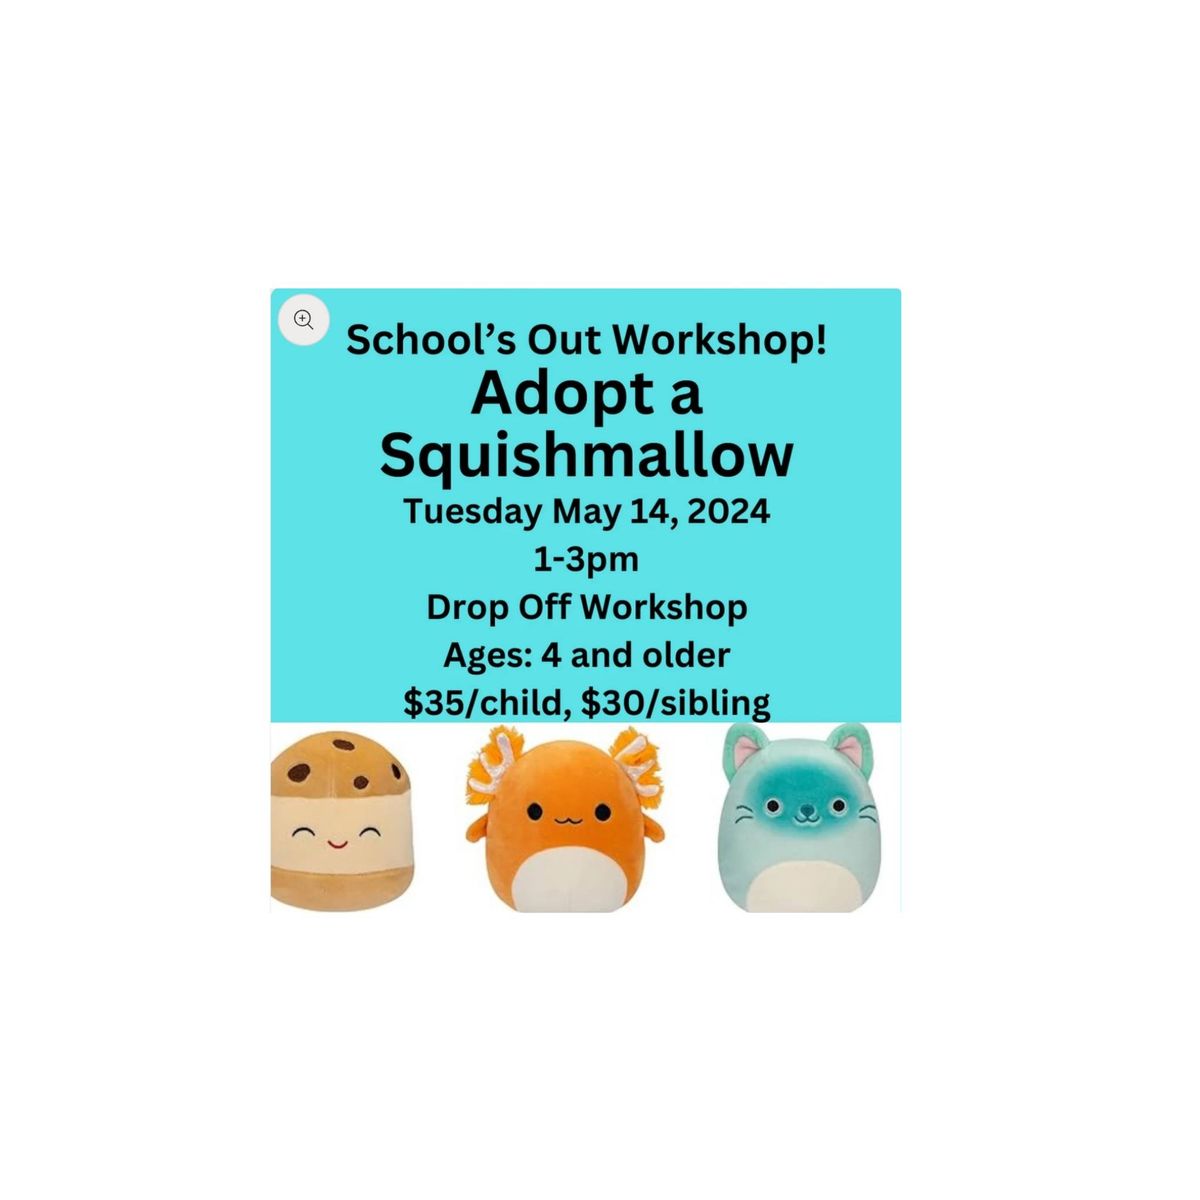 School's Out DROP OFF Squishmallow Workshop!